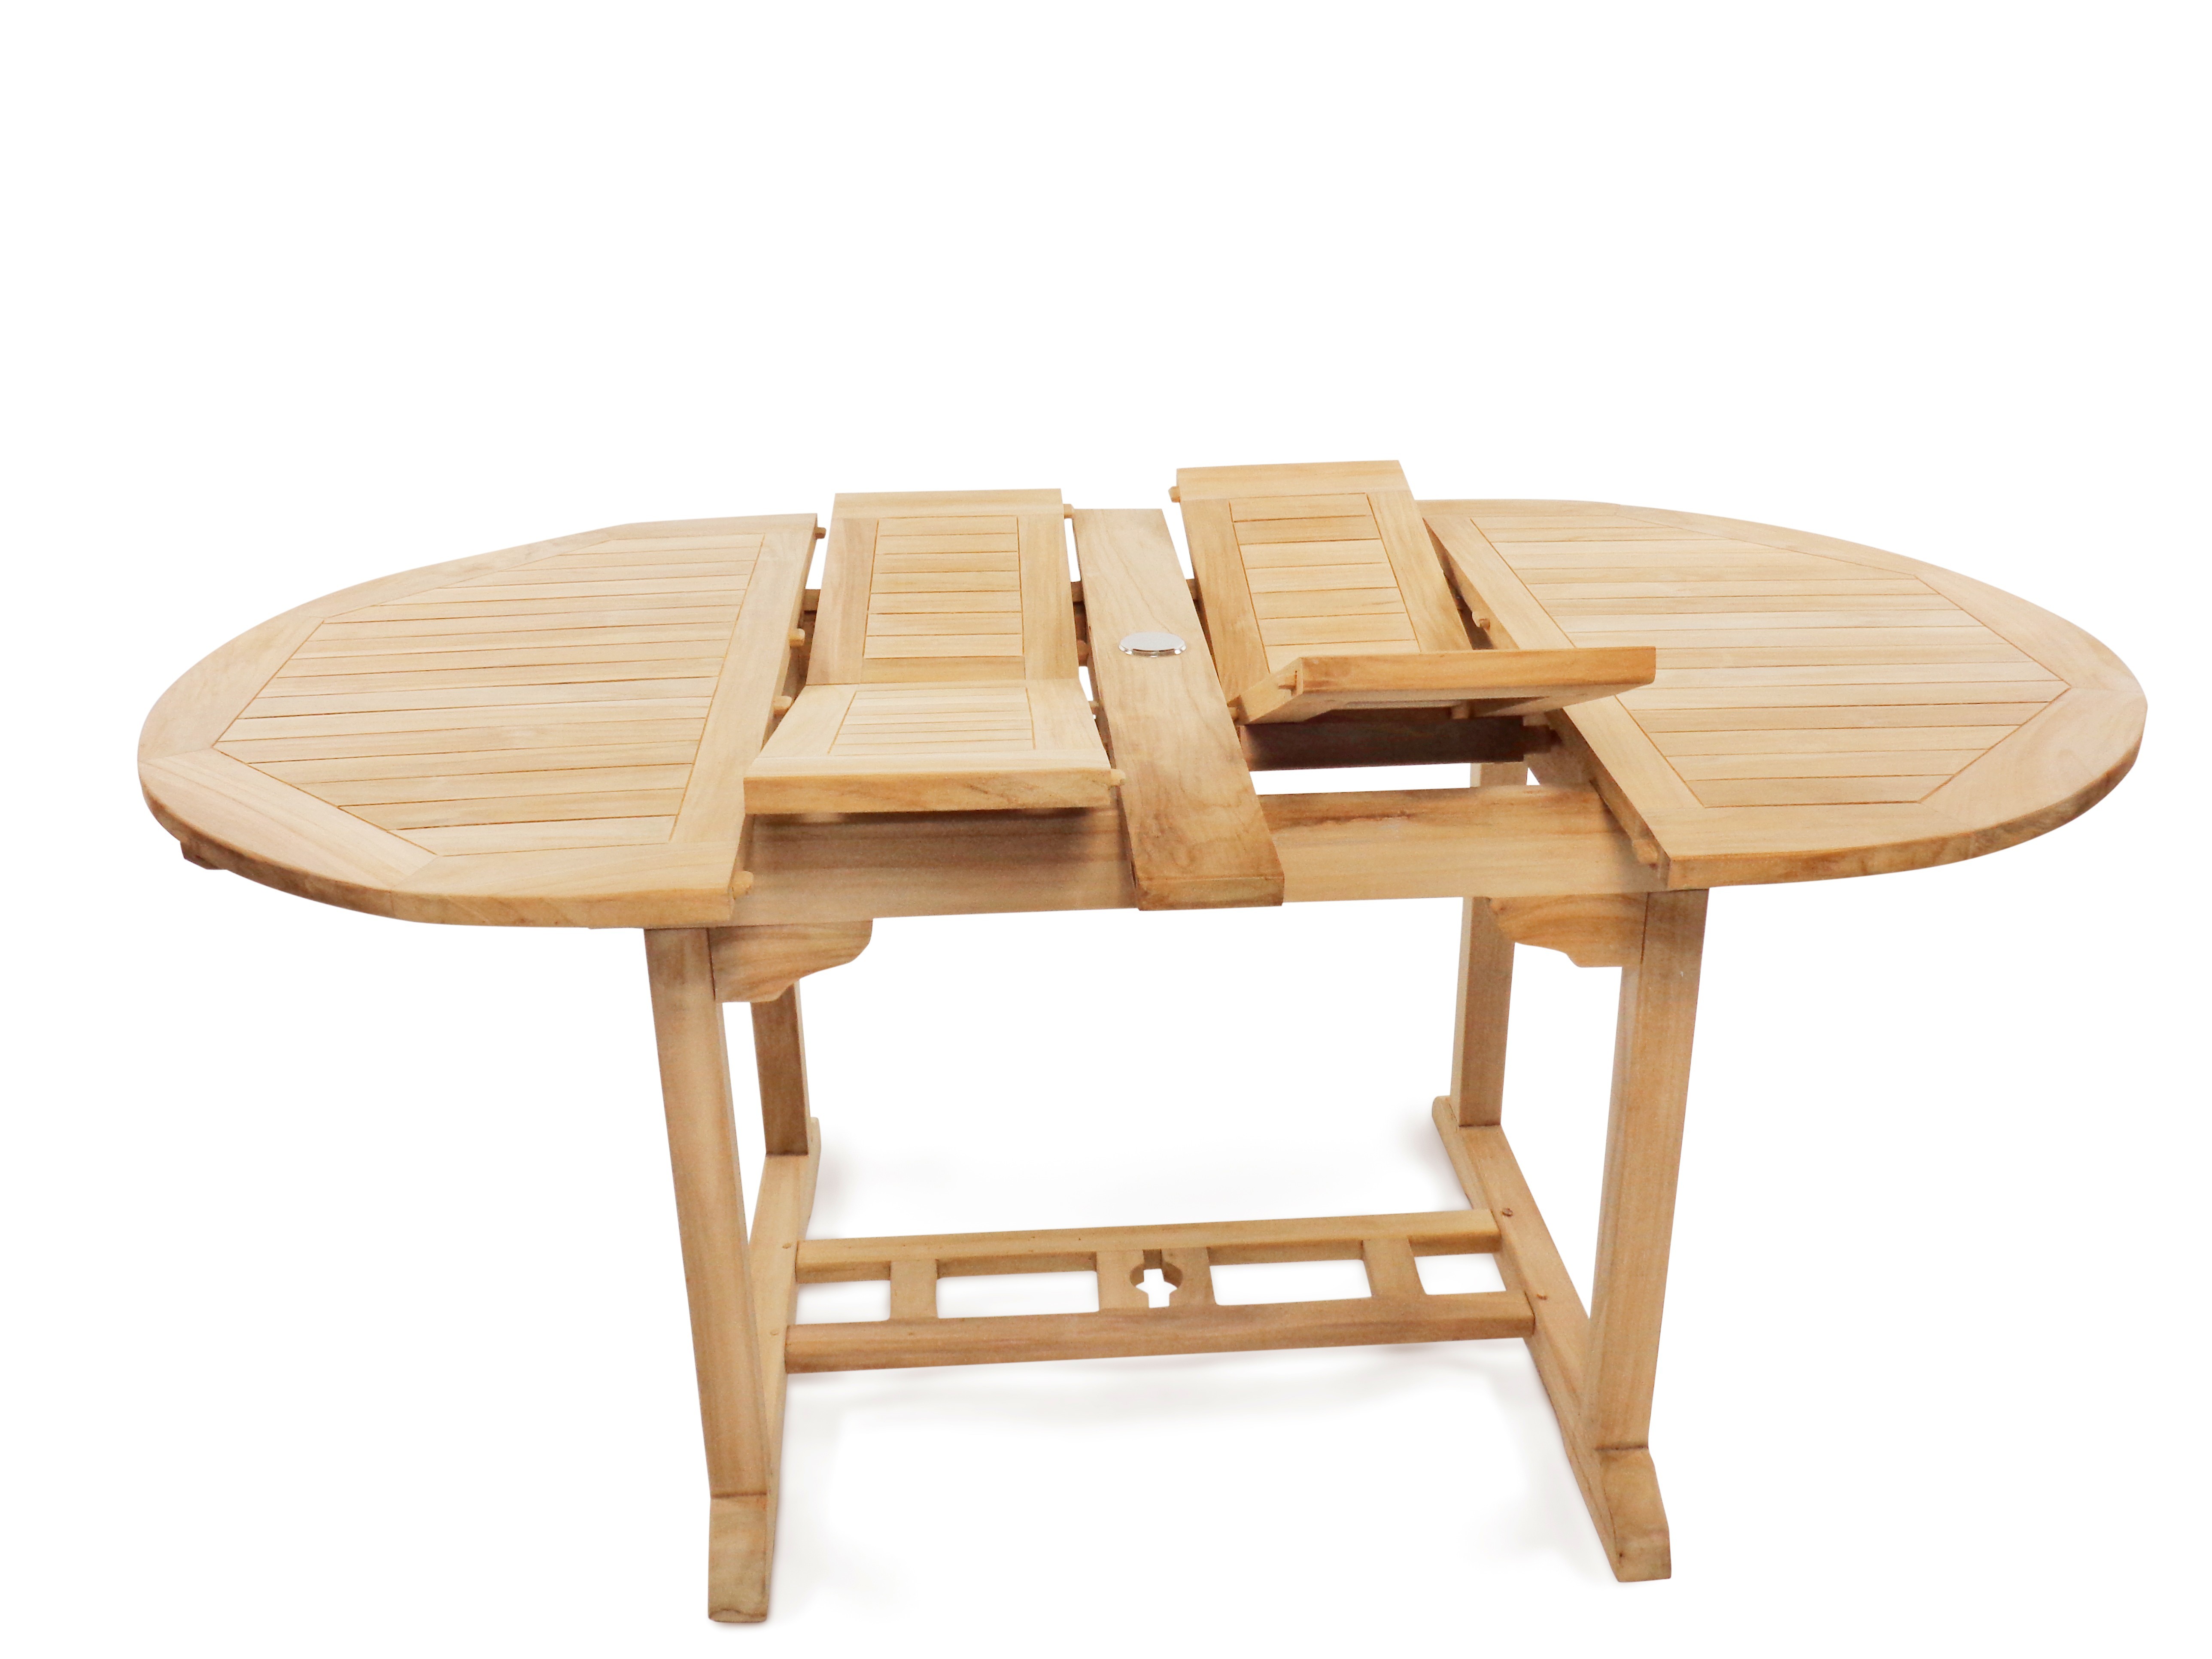 Bimini Counter Height 66" x 39" Double Leaf Oval Extension Table...Seats 6...makes 3 Different Size Tables